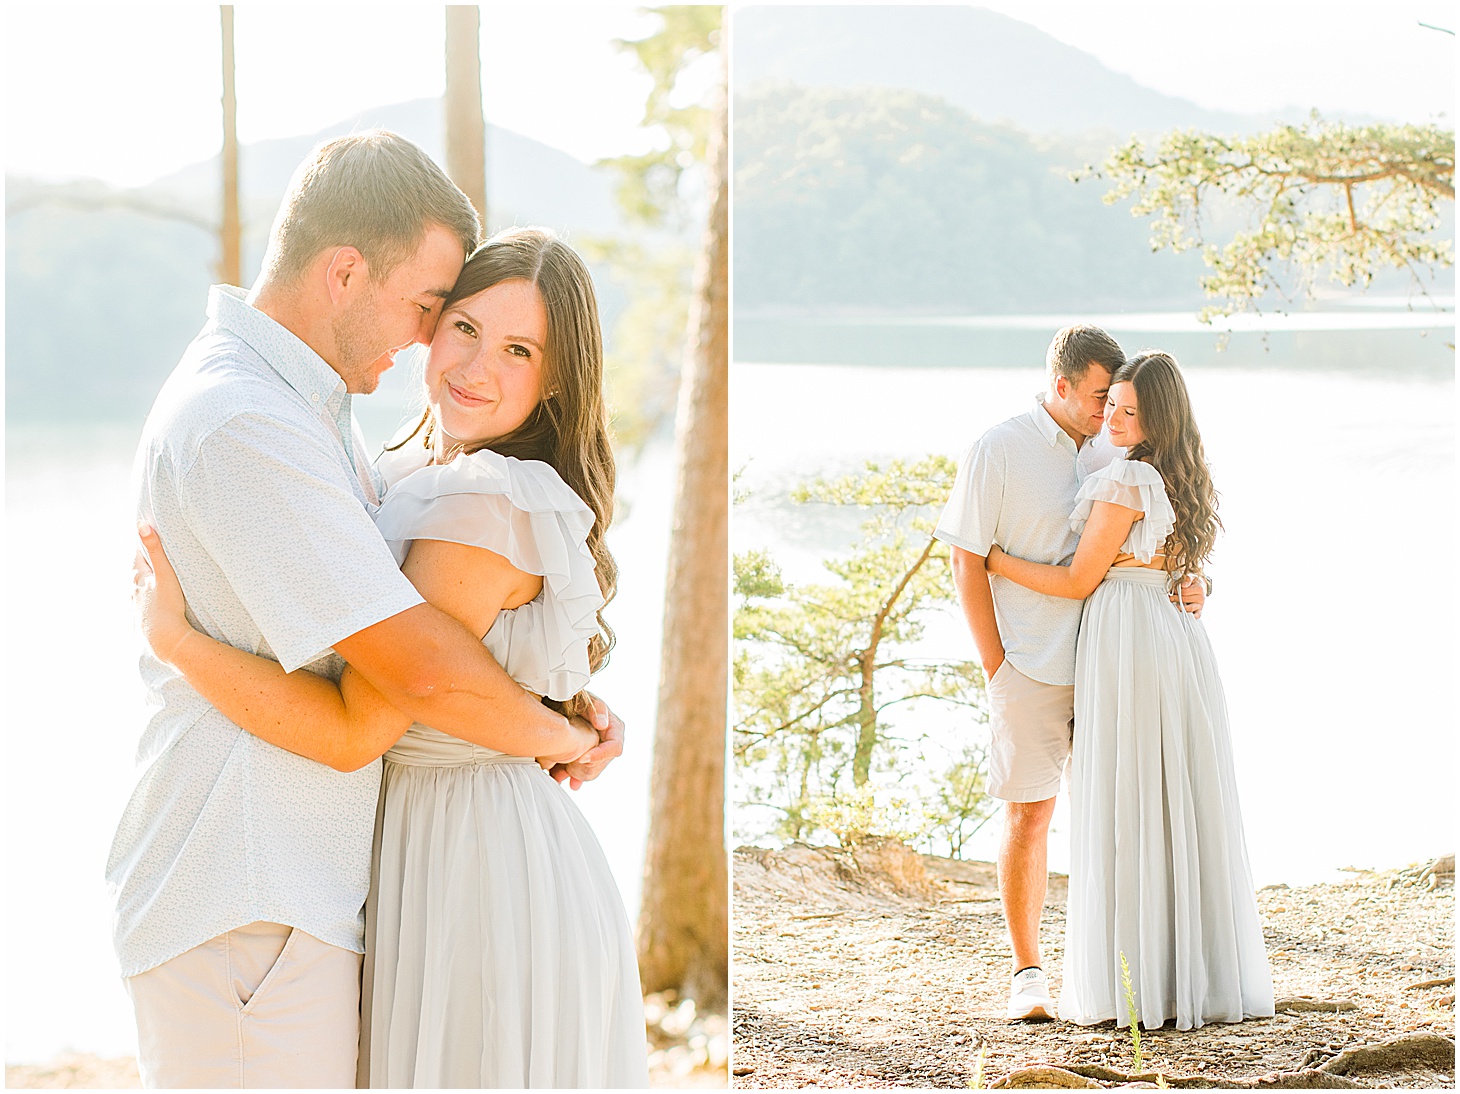 carvinscove_roanokeengagementsession_virginiaweddingphotographer_vaweddingphotographer_photo_0074.jpg